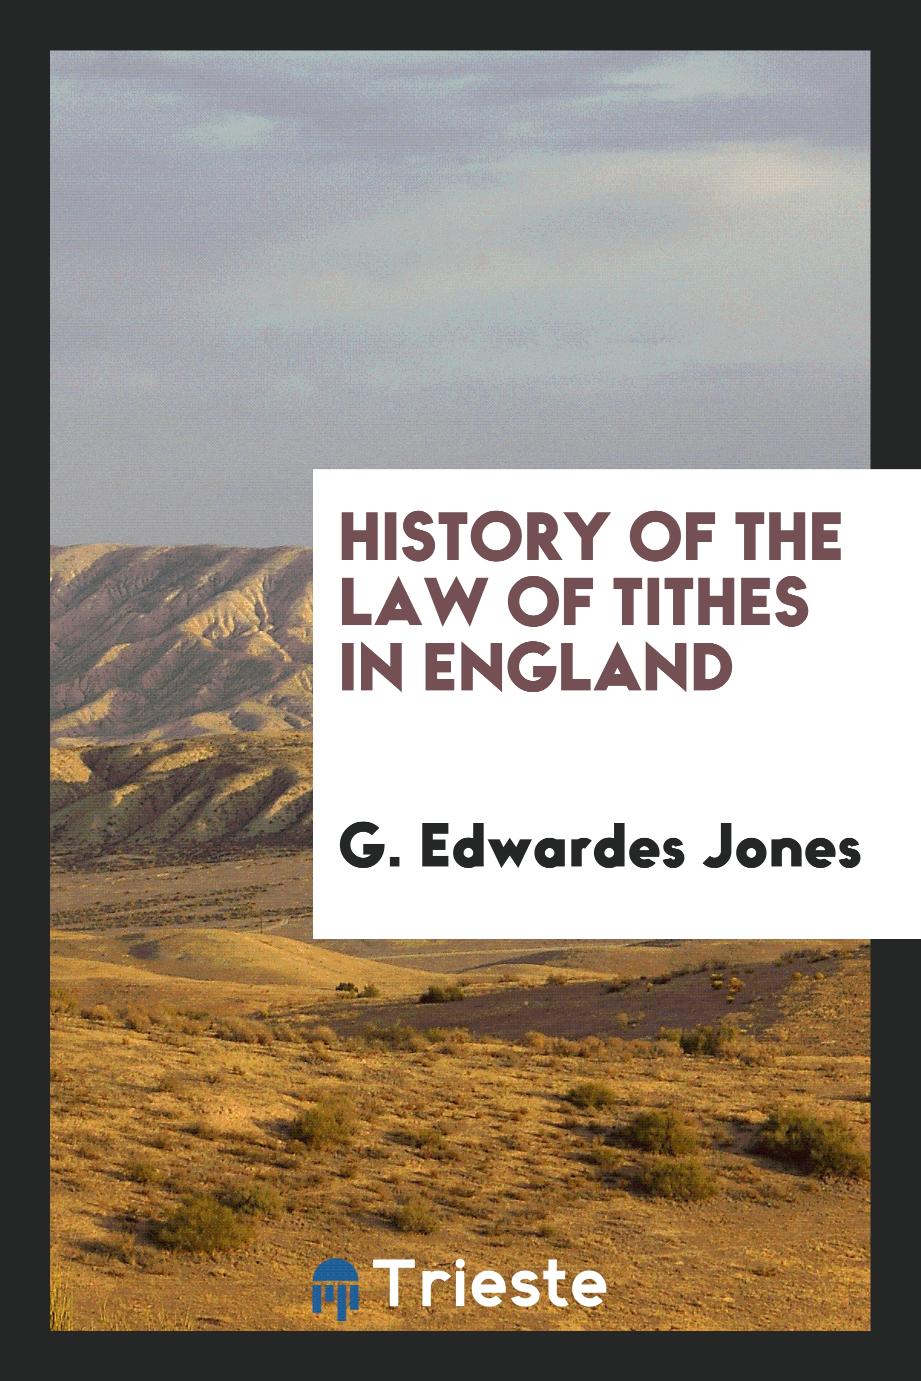 History of the Law of Tithes in England